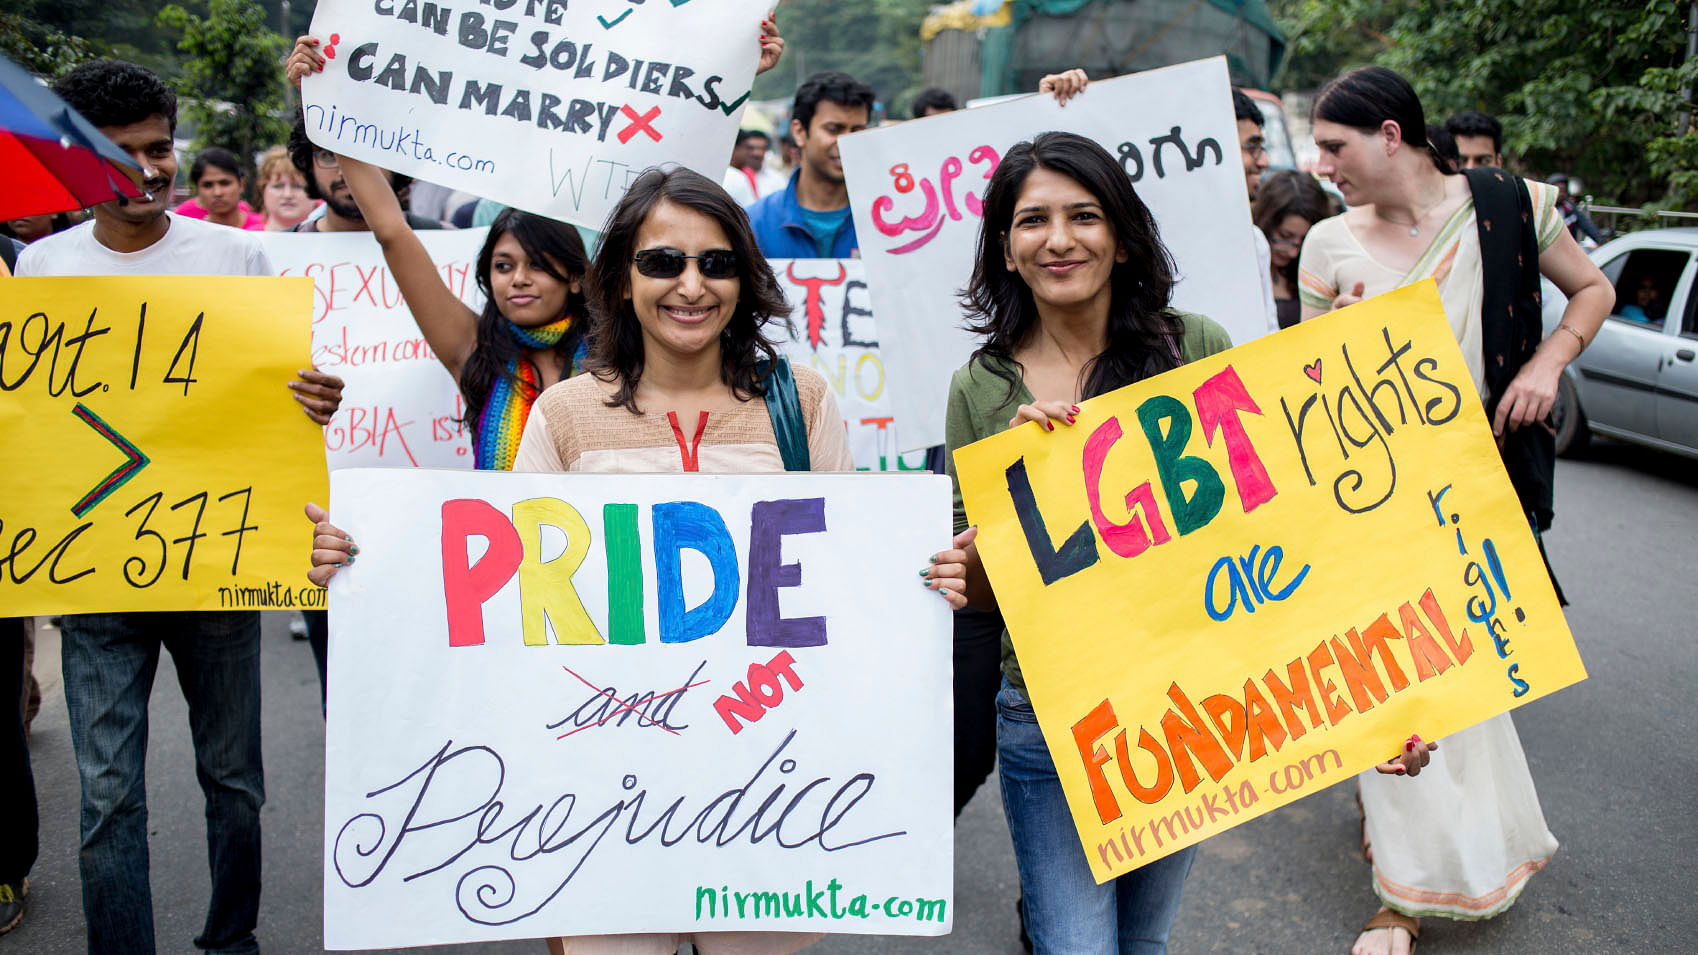 Image of an LGBTQ rights protest used for representational purpose.